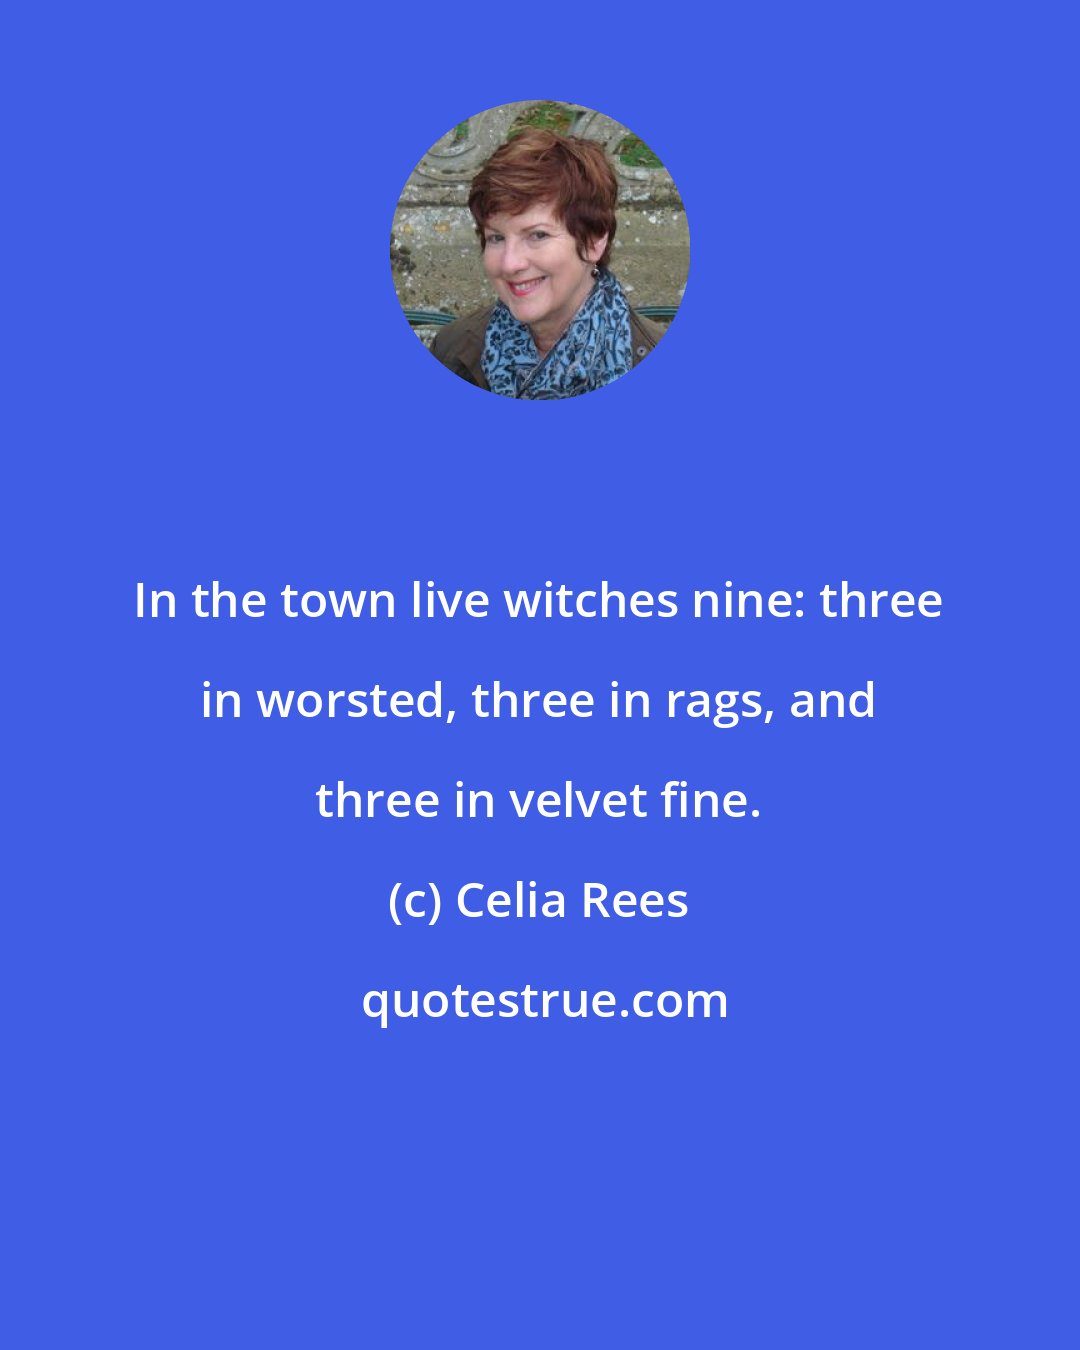 Celia Rees: In the town live witches nine: three in worsted, three in rags, and three in velvet fine.